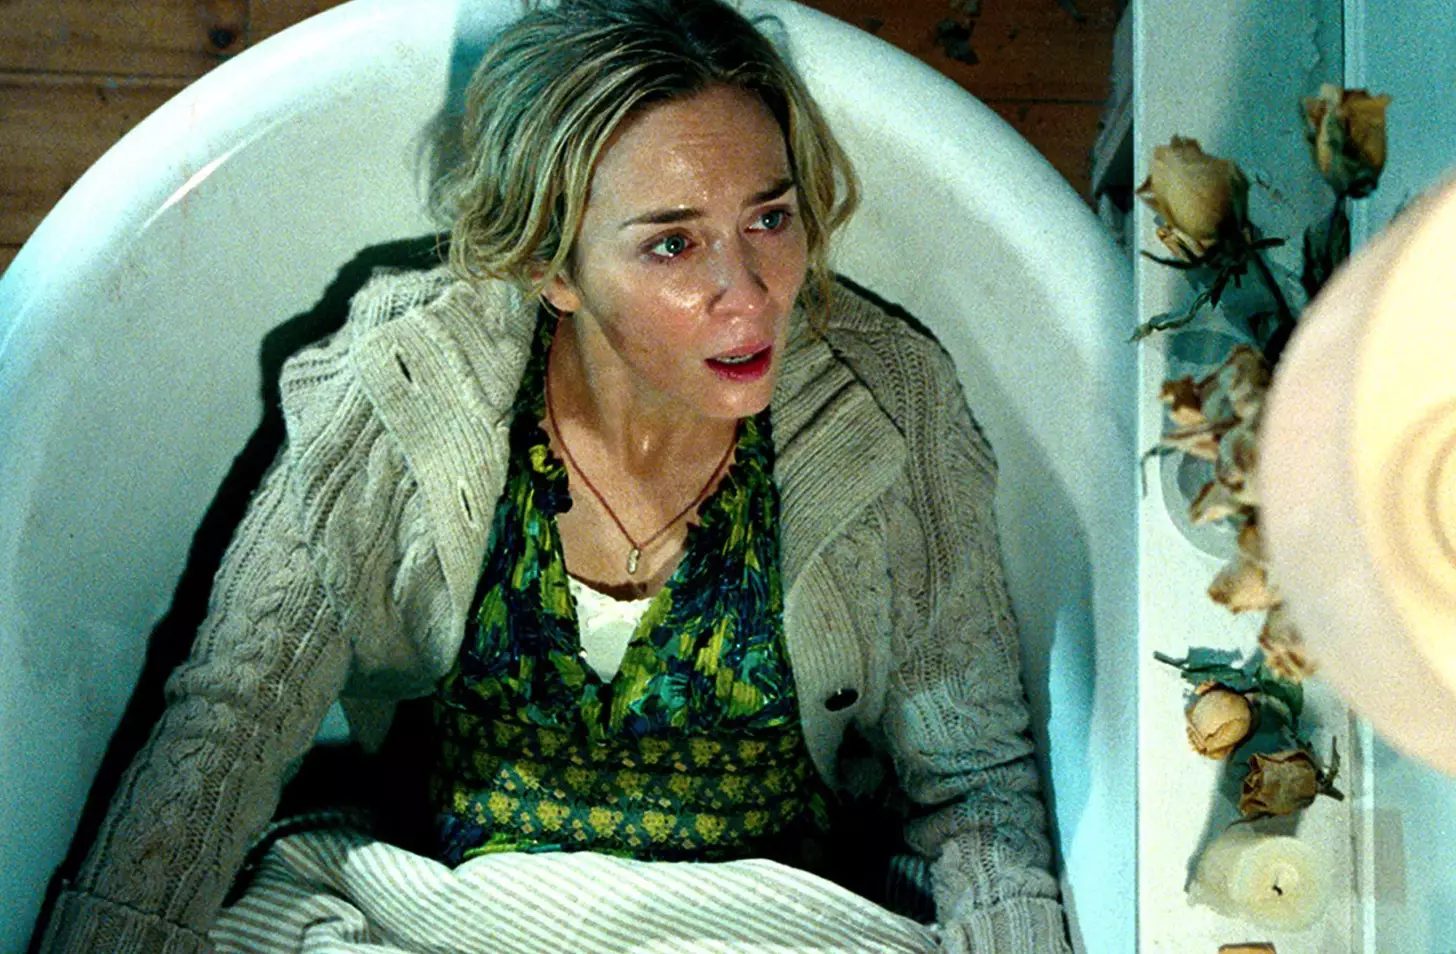 Emily Blunt as Evelyn will have to cope with a newborn baby in a world where if you make noise, you will be hunted and killed (